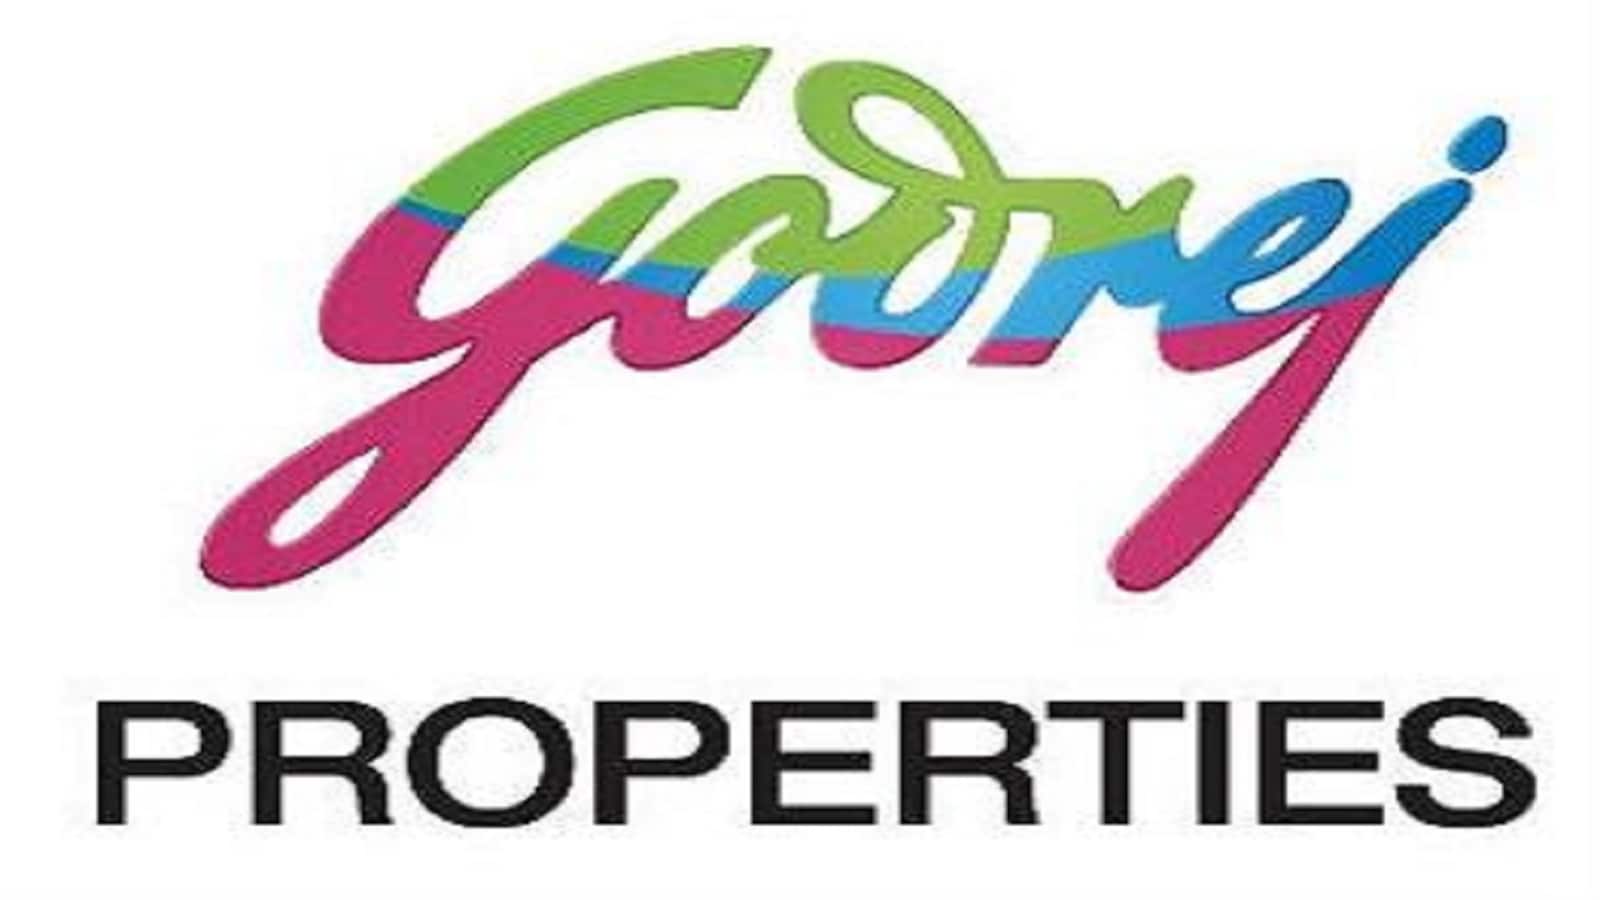 Godrej Properties plans Rs 7,500 crore investment in next 12-18 month to acquire, develop new projects